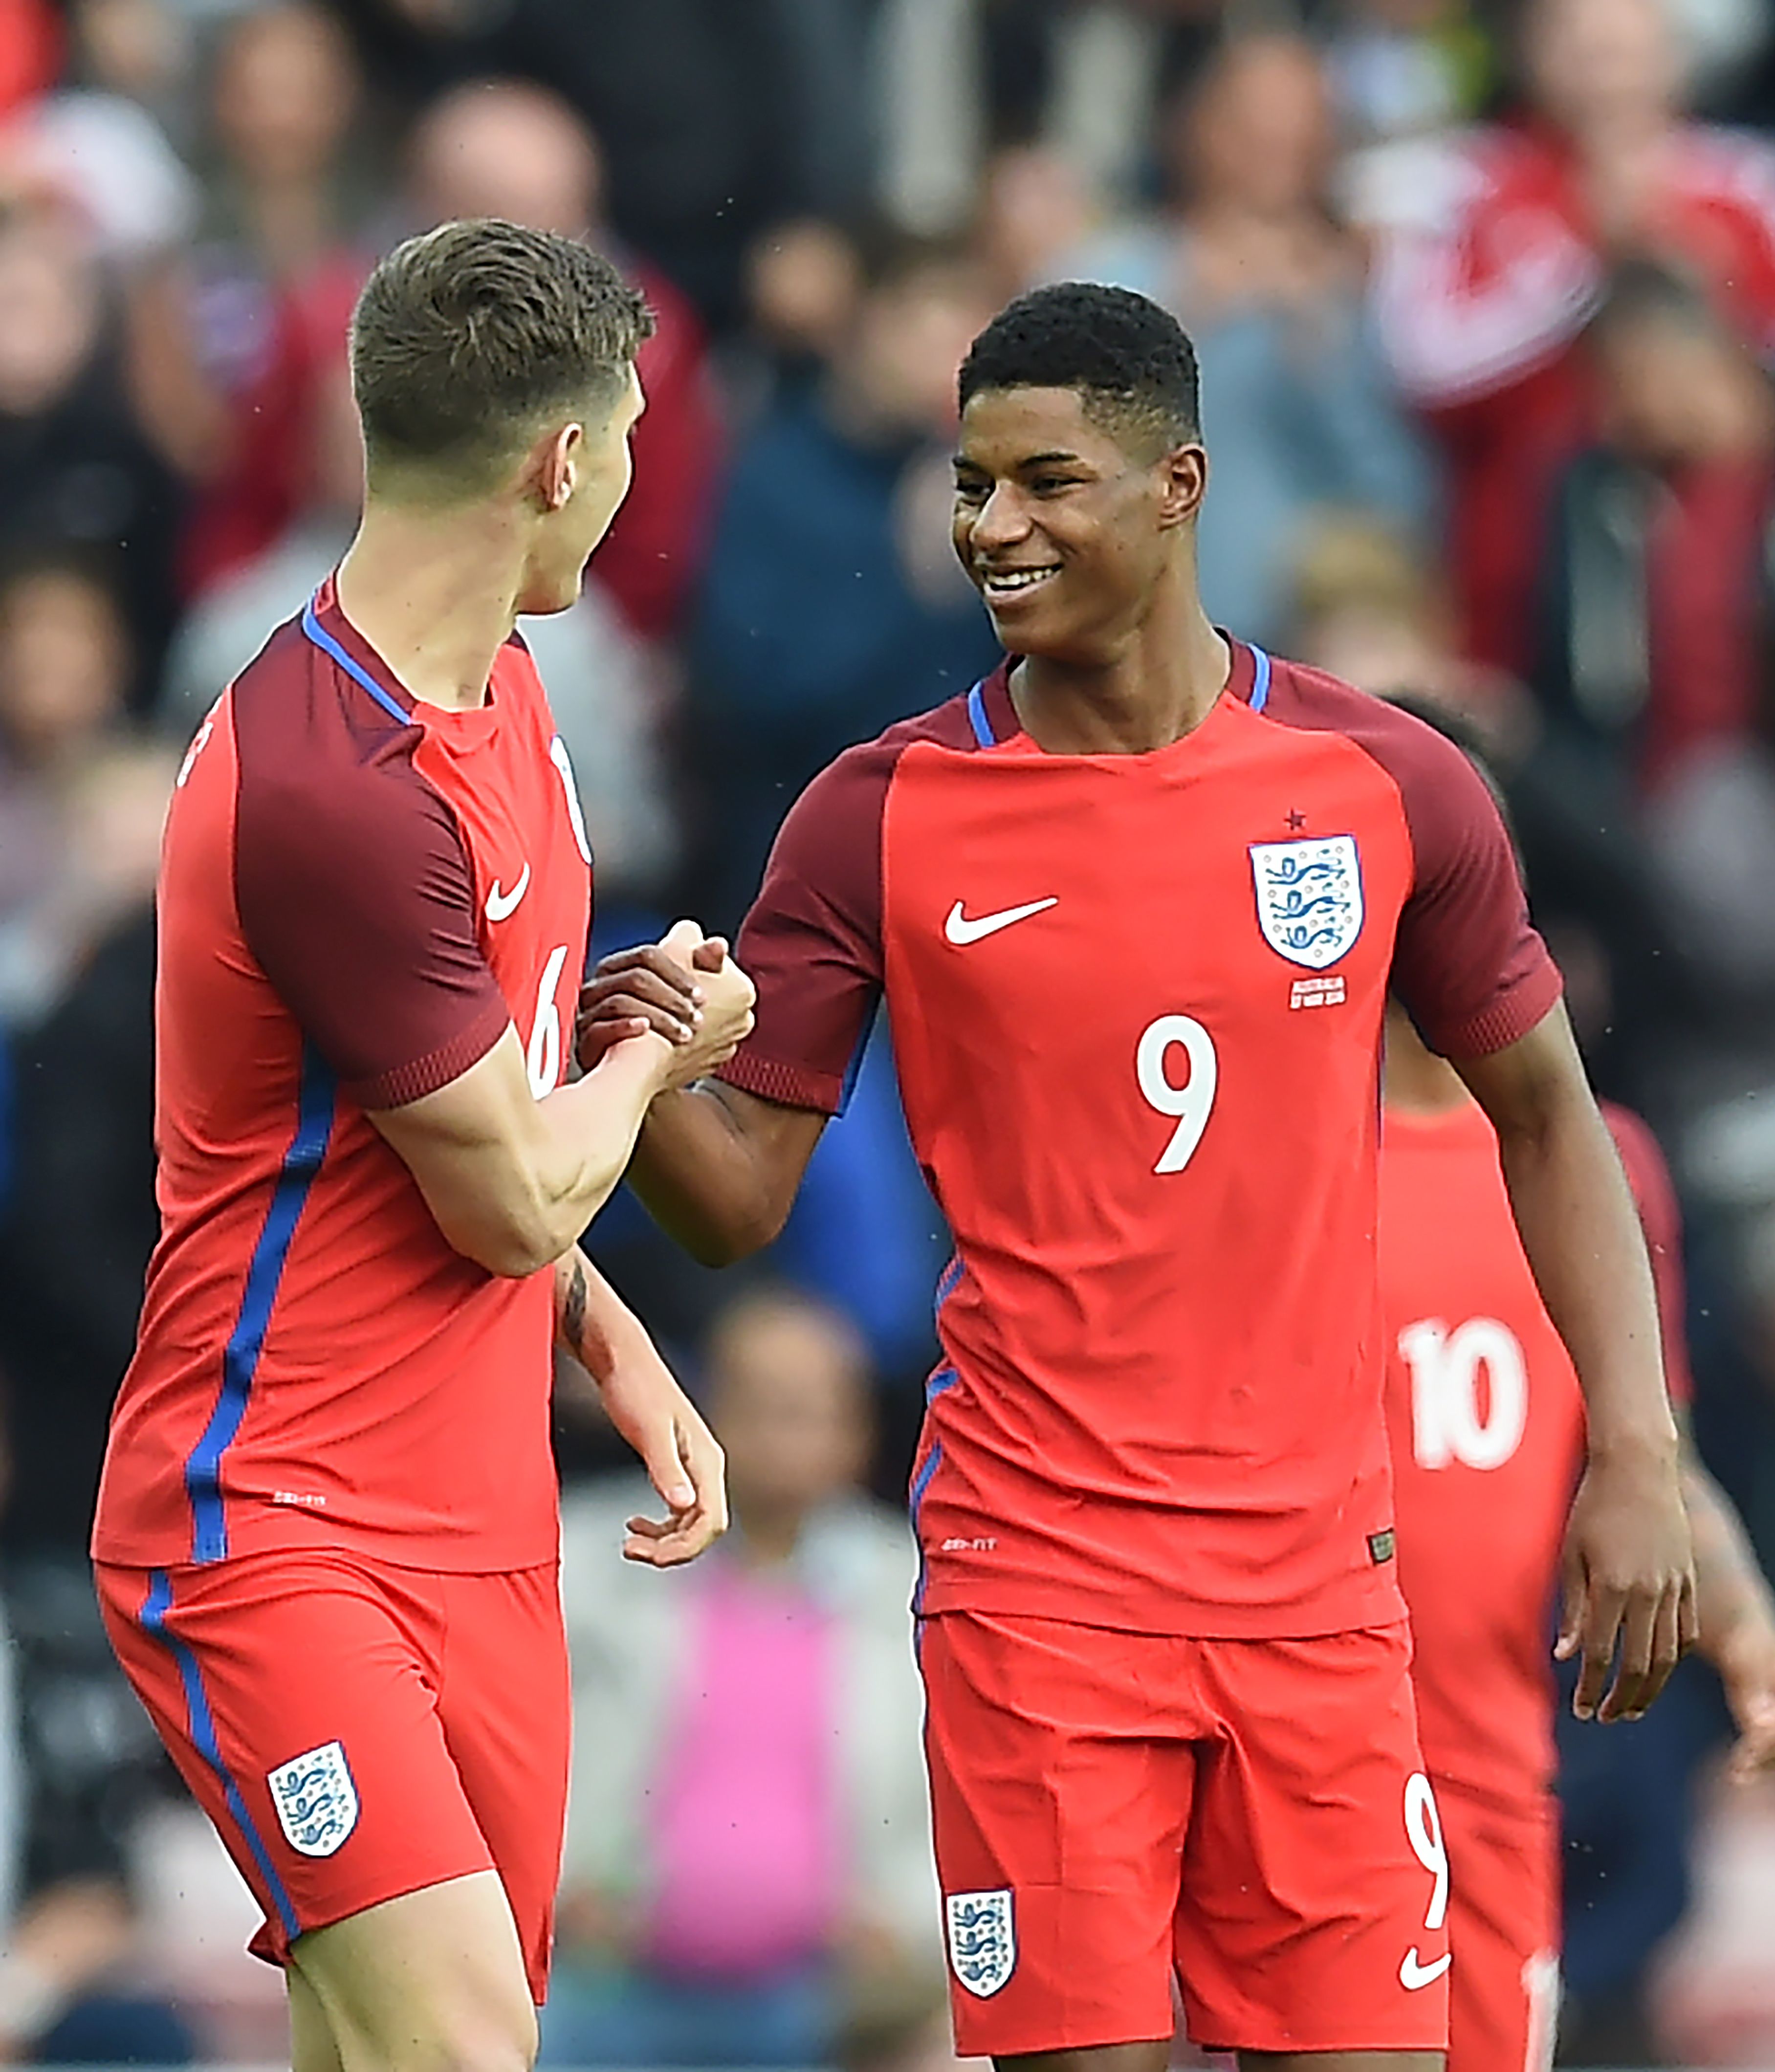 England got off to the perfect start with Marcus Rashford finding the net with a volley in just the third minute.